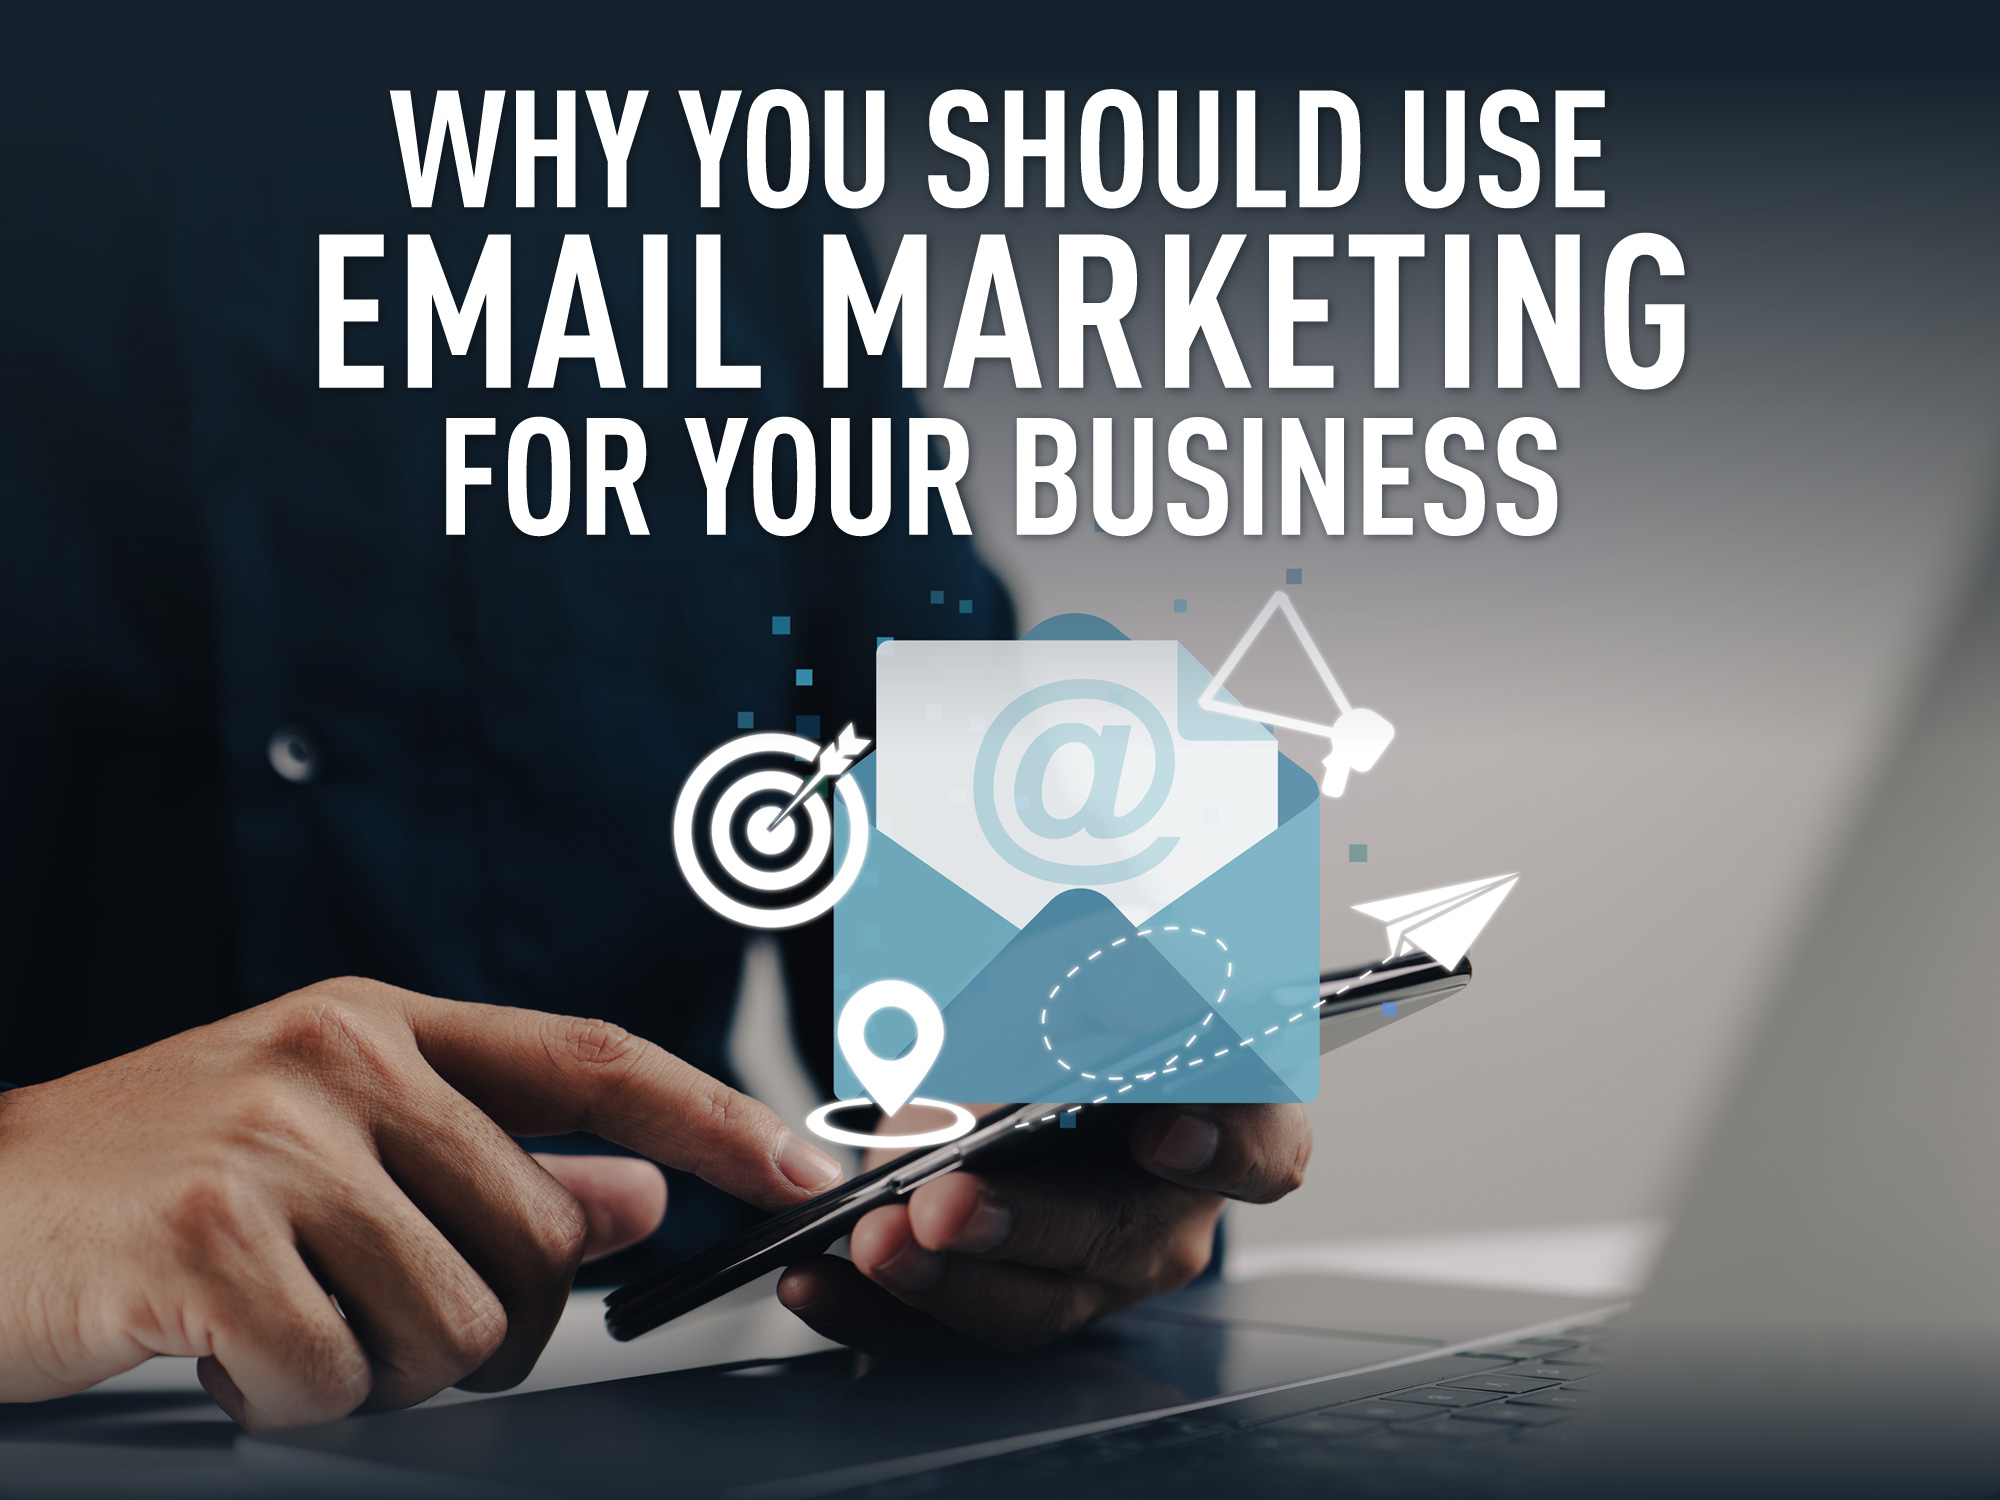 Why you should use email marketing for your business